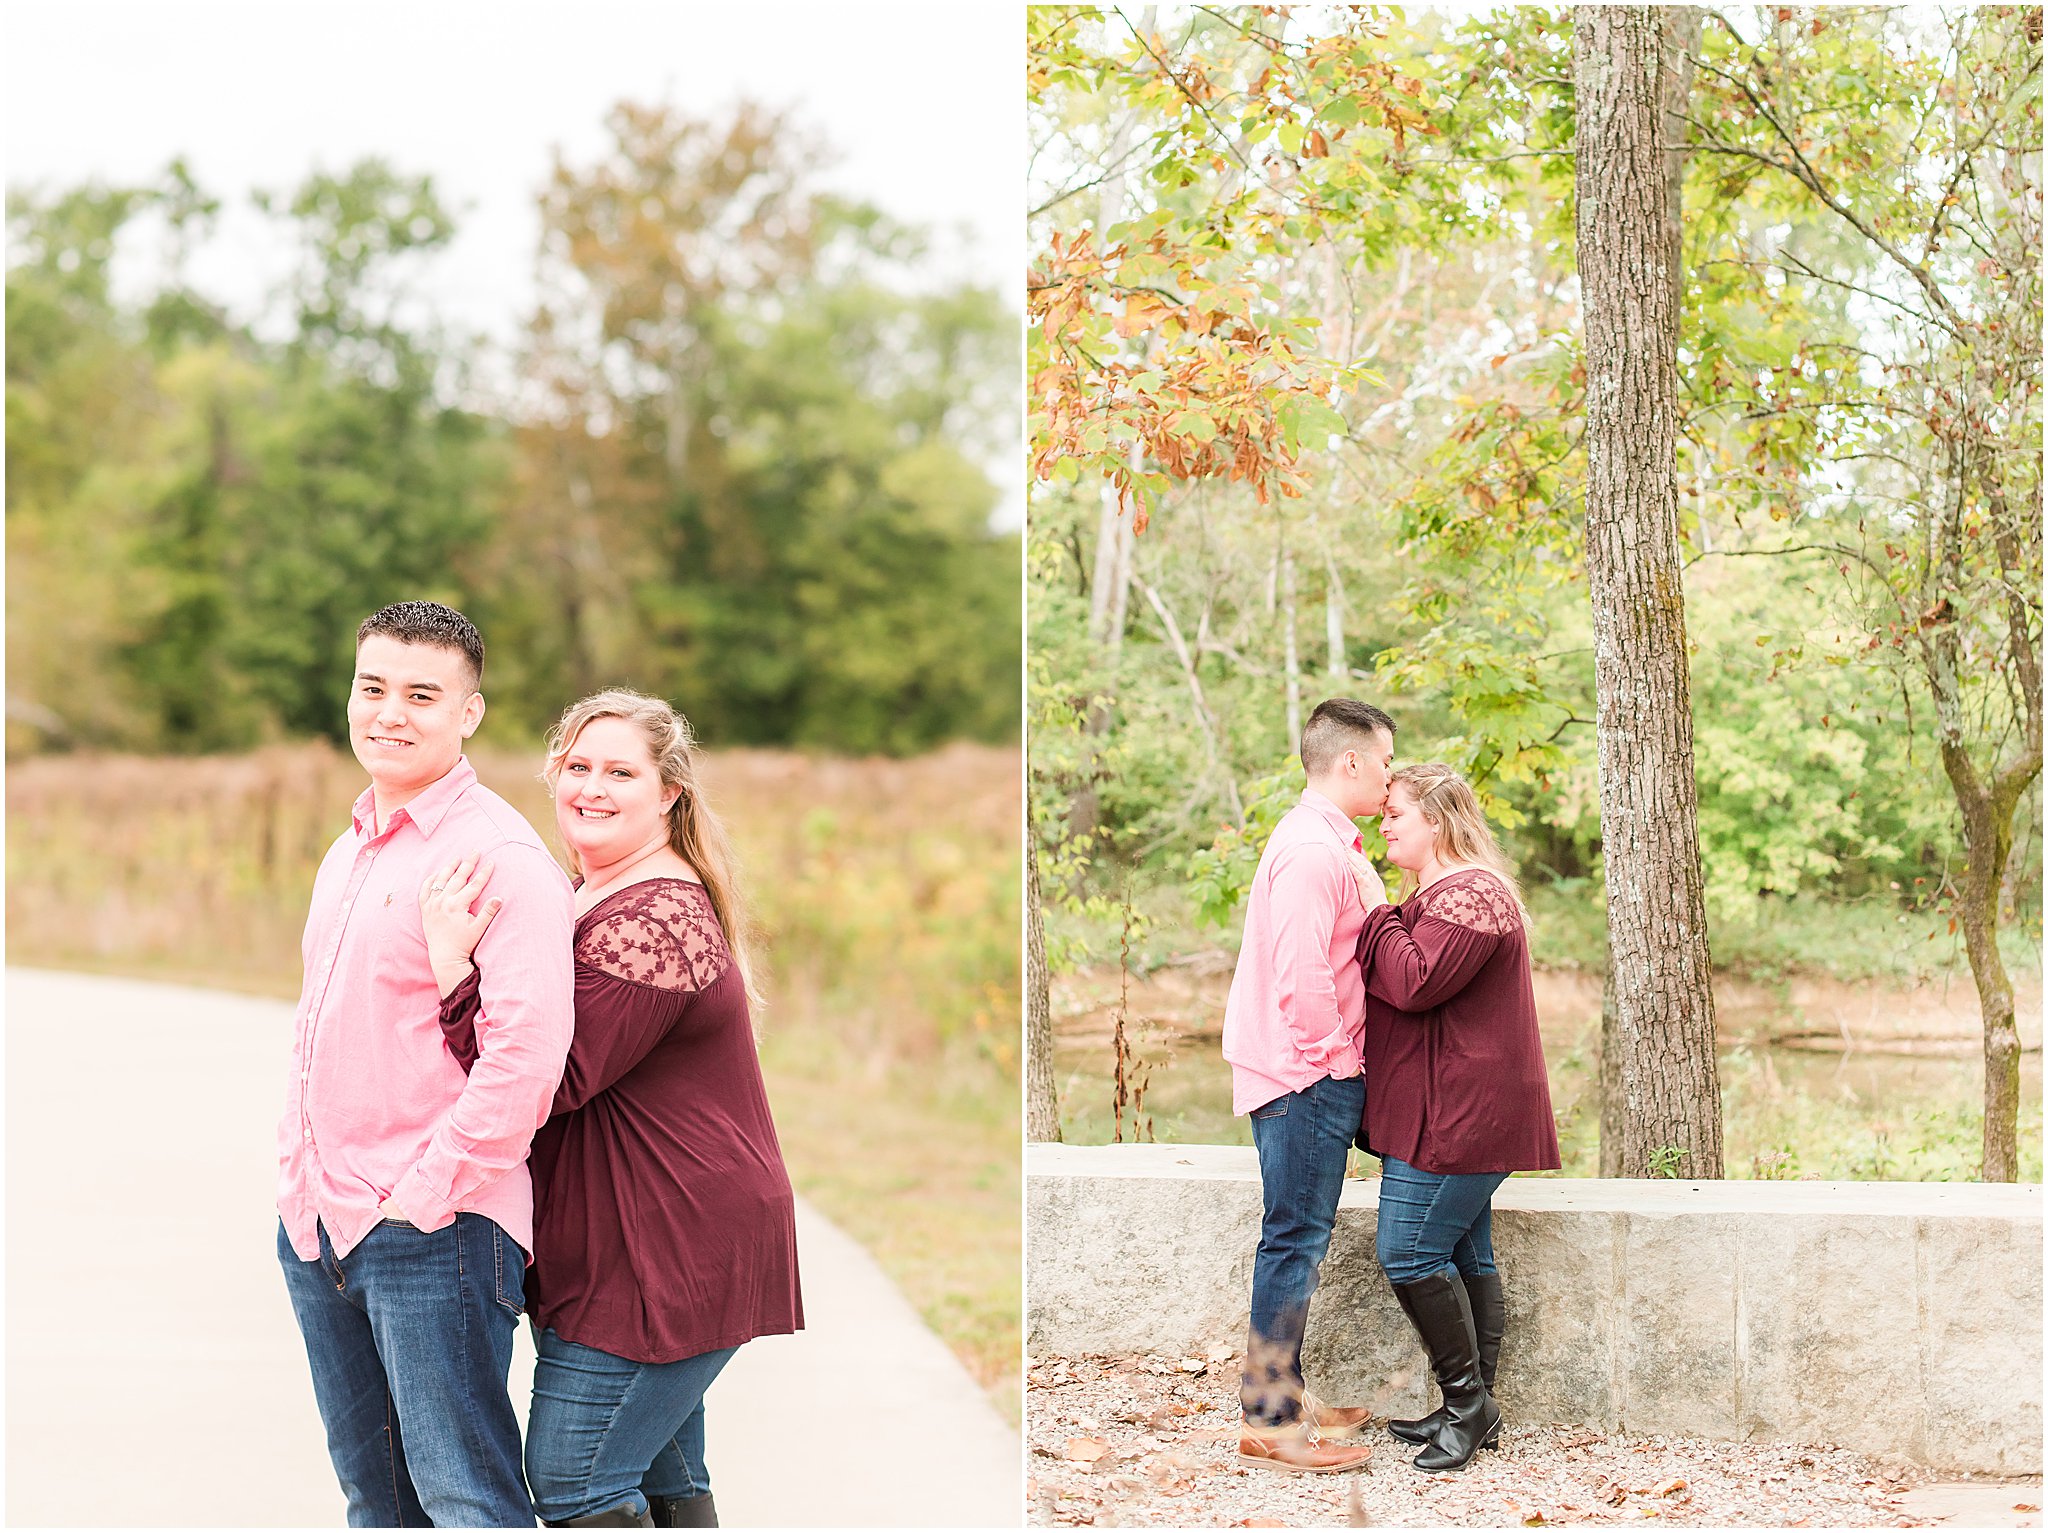 Man kissing woman on forehead during Beckley Creek Park engagement session